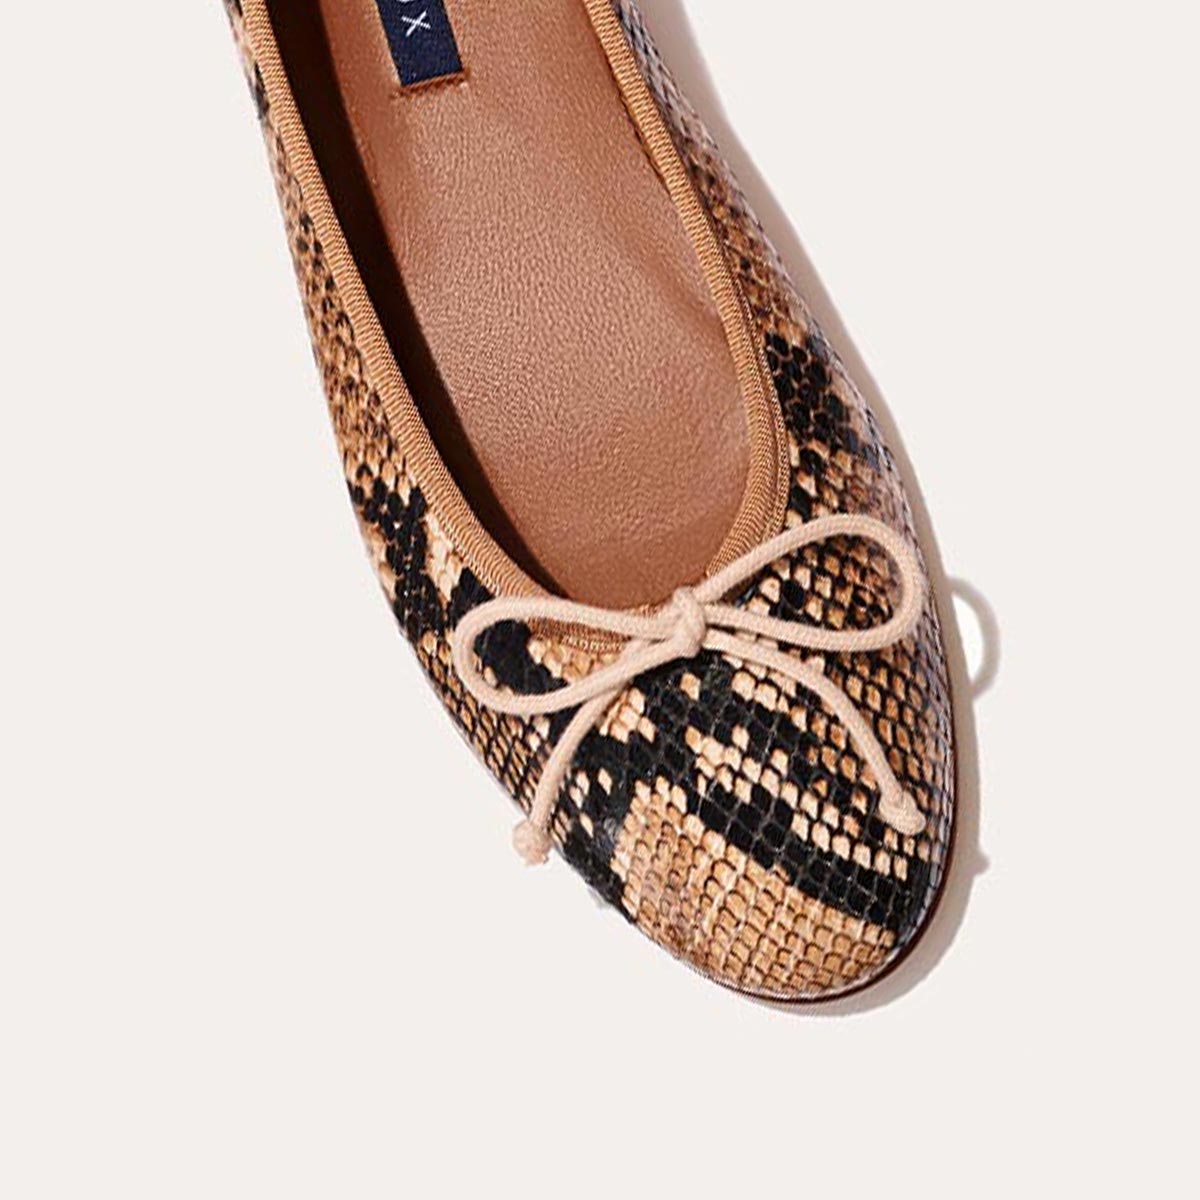 The Demi - Beige Python Embossed